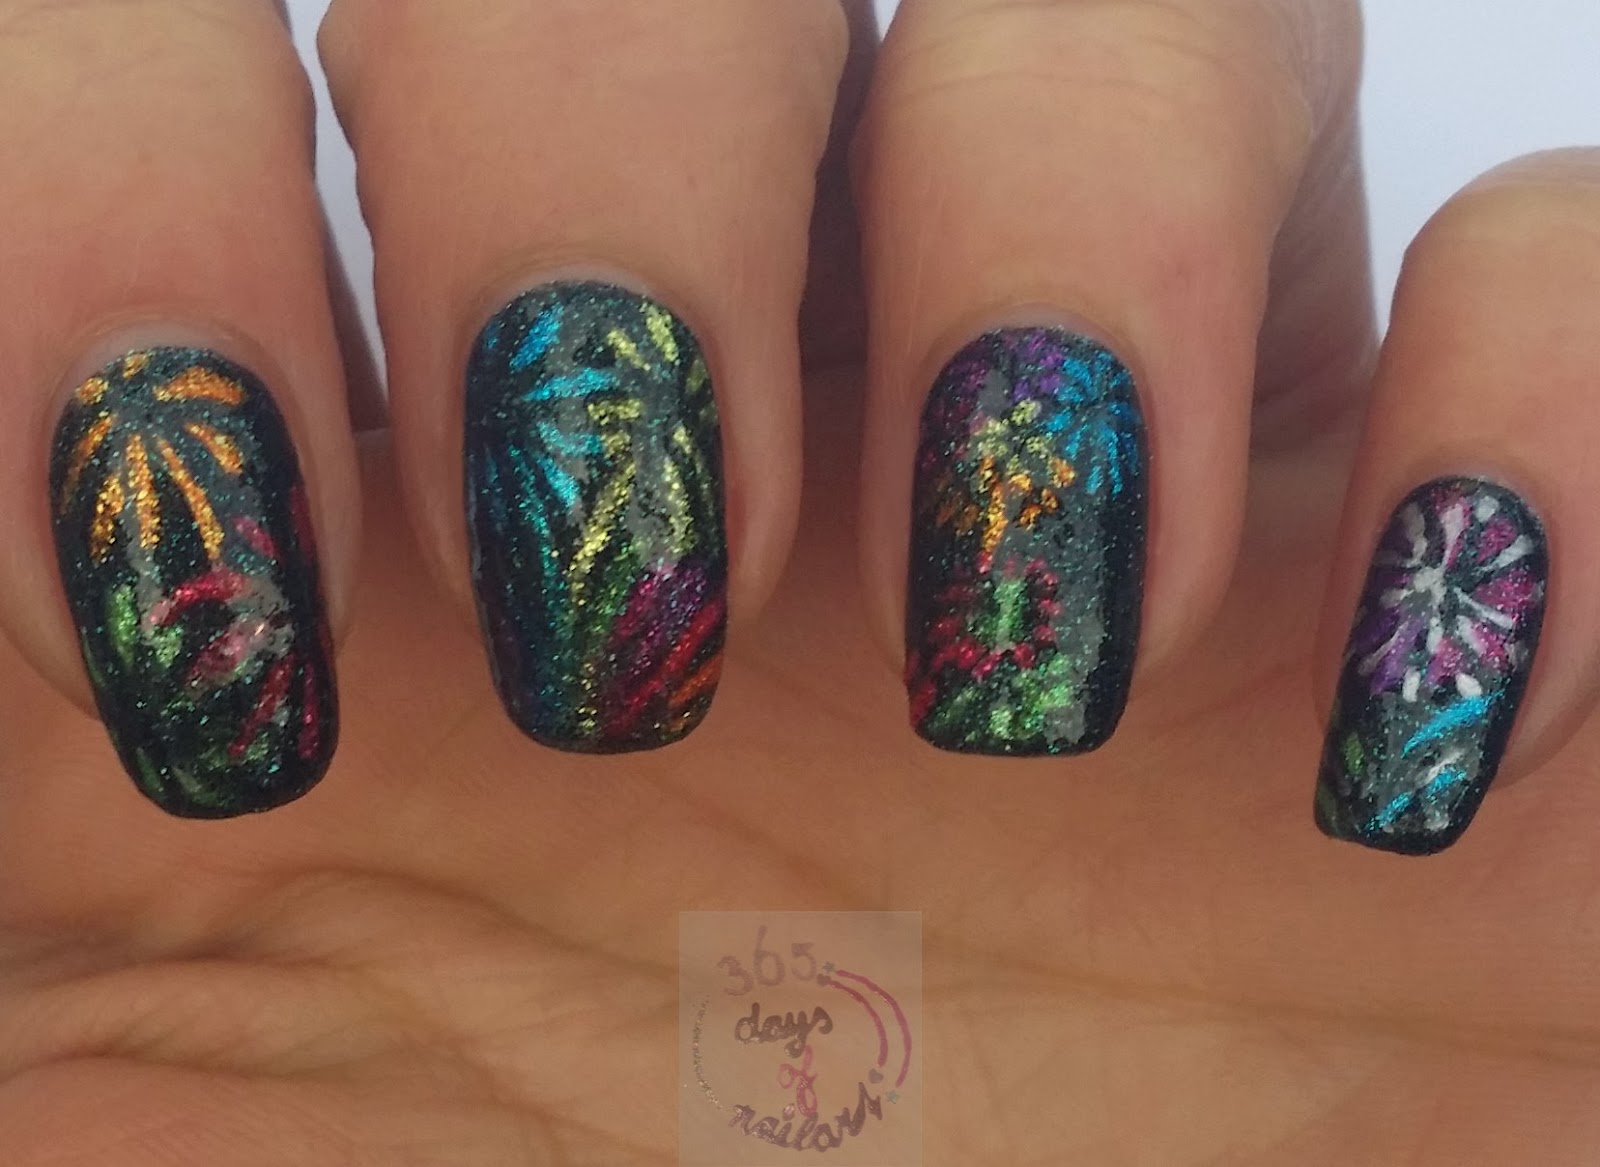 1. Firework Nail Art Designs for the Fourth of July - wide 8